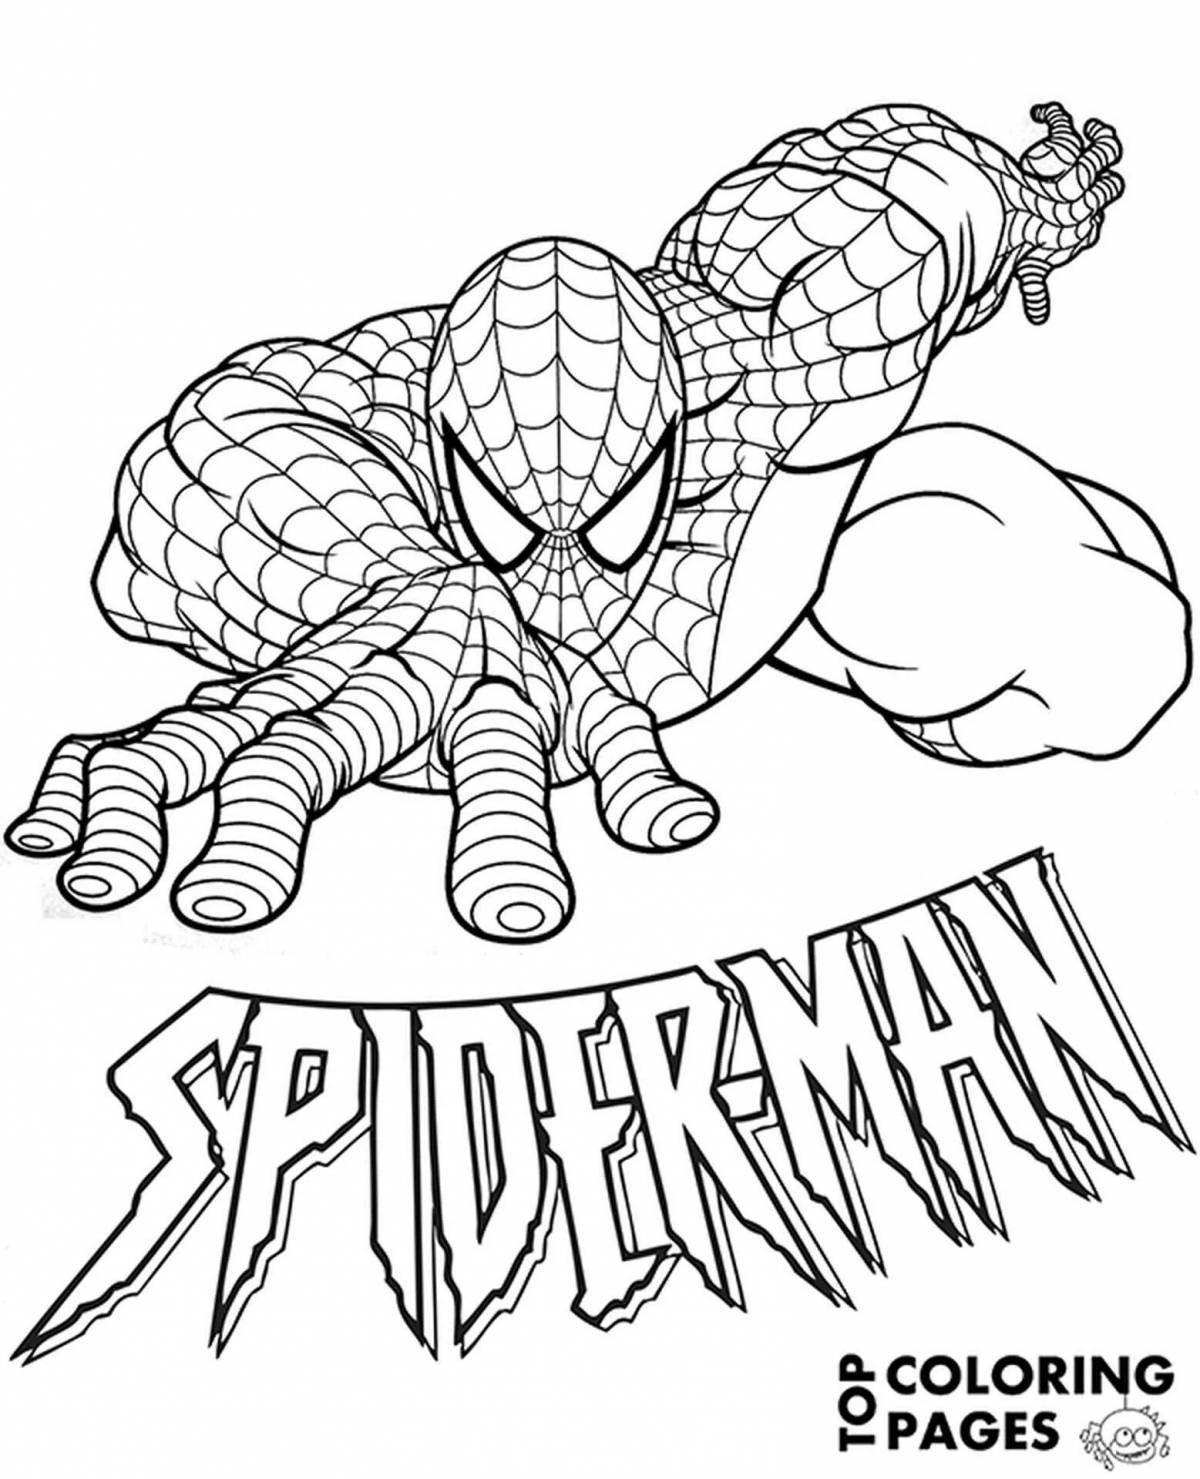 Gorgeous spiderman antistress coloring book